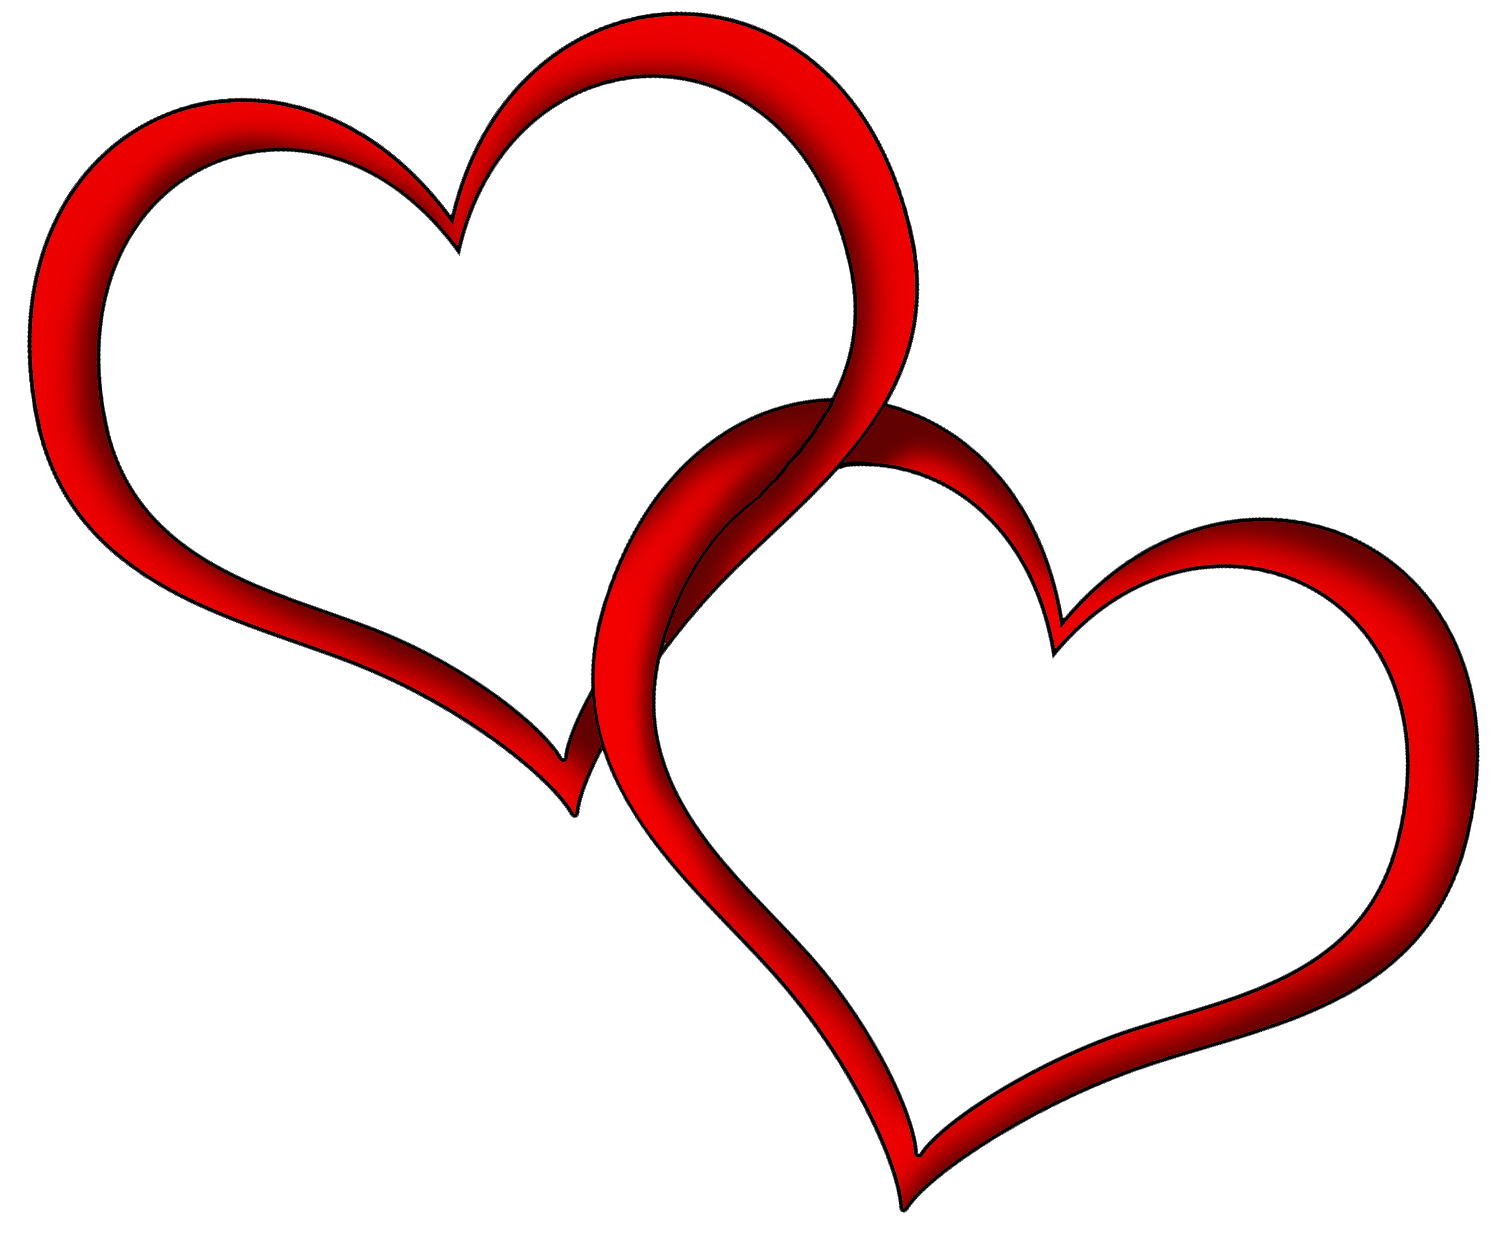 Heart PNG image, free downloa